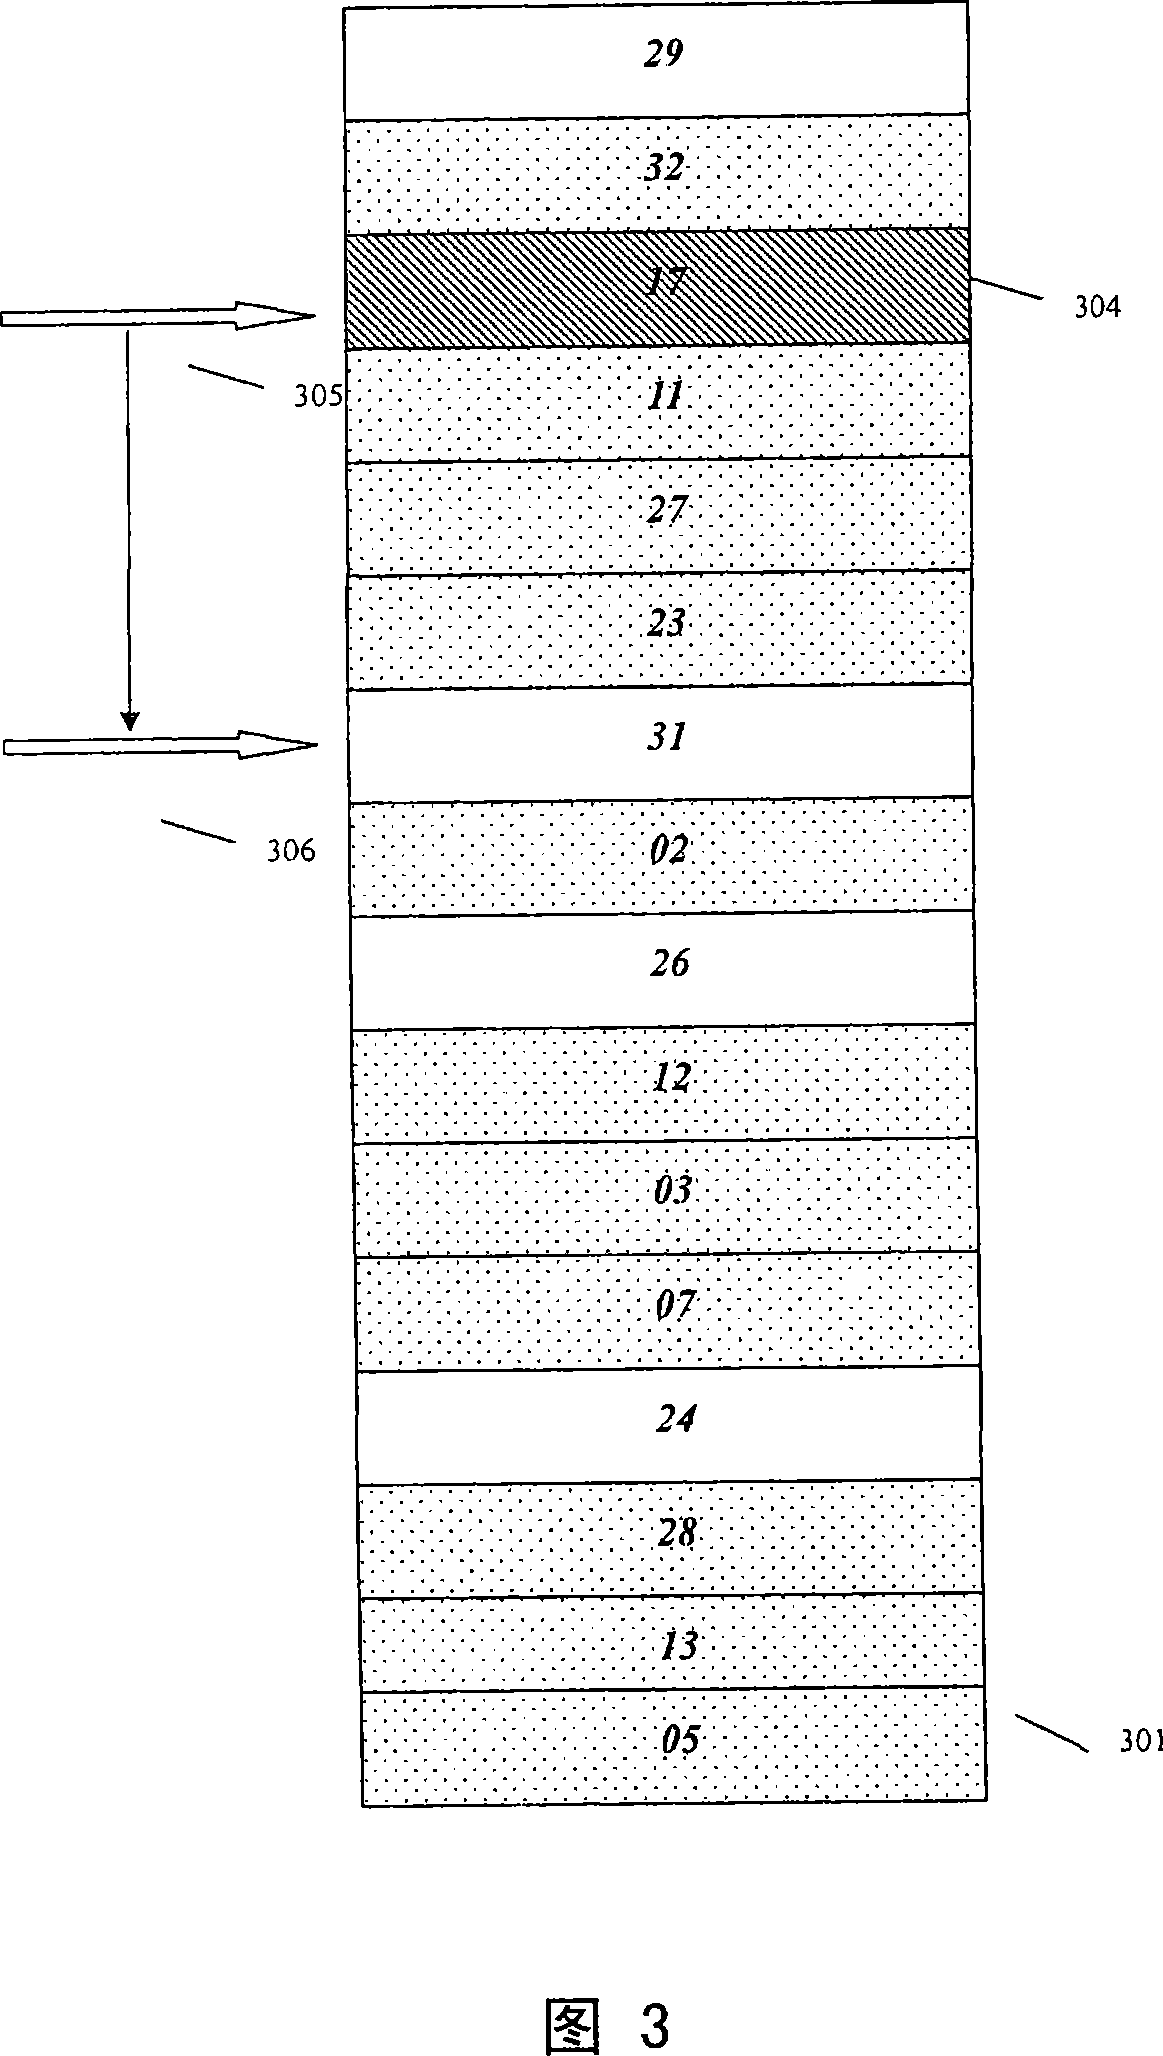 Global positioning system satellite searching and scheduling method